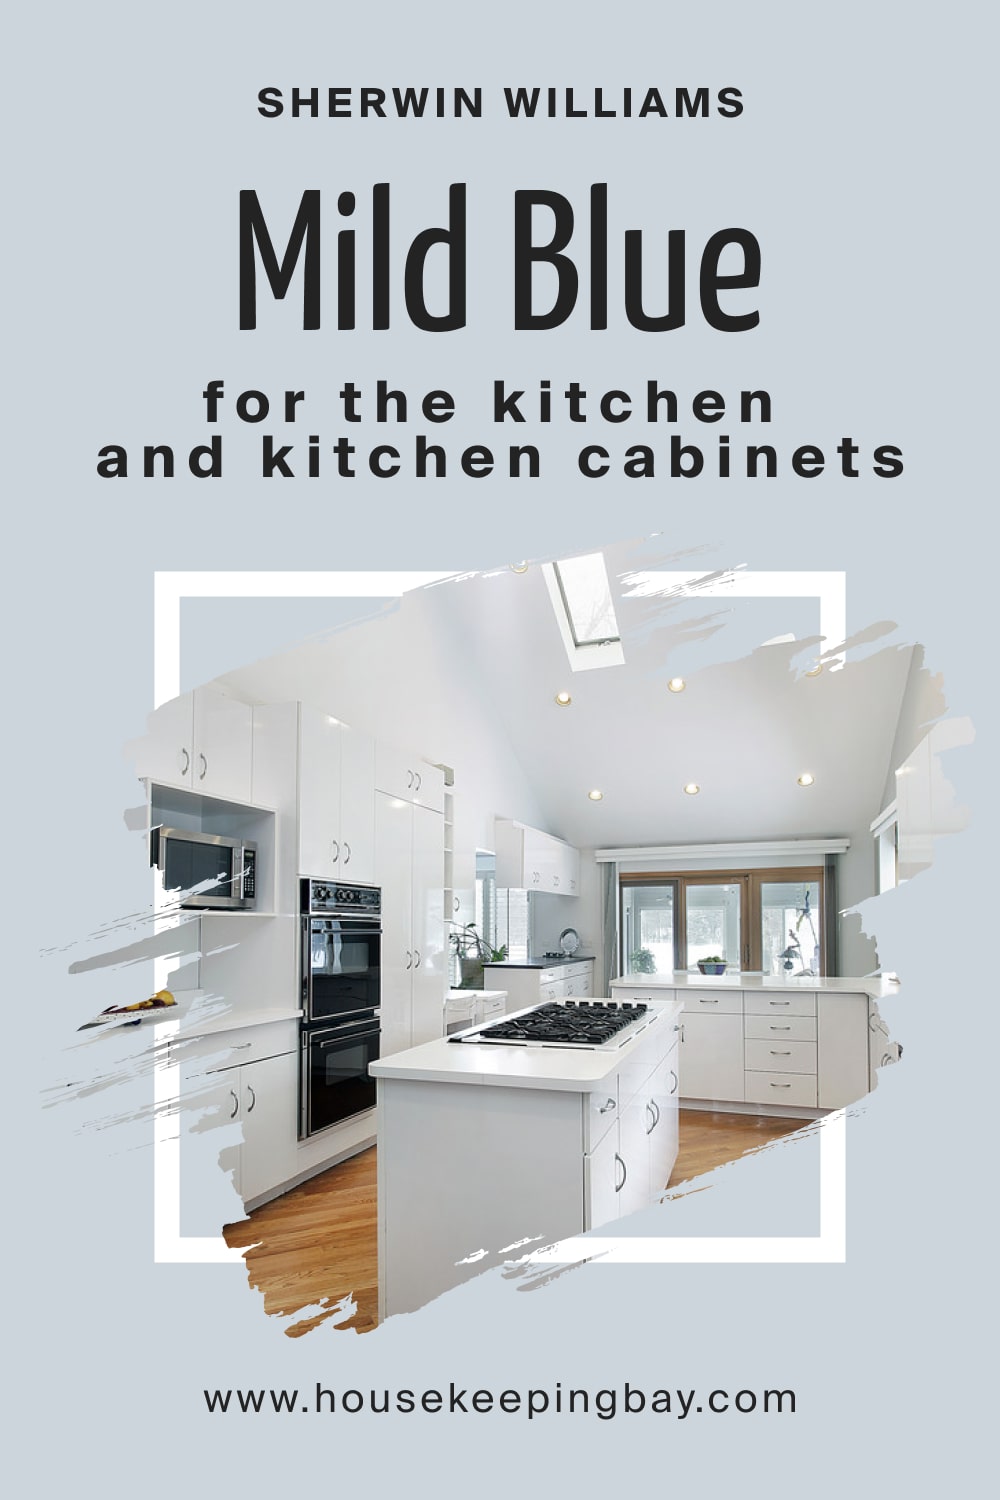 Sherwin Williams. Mild Blue SW 6533 For the Kitchen